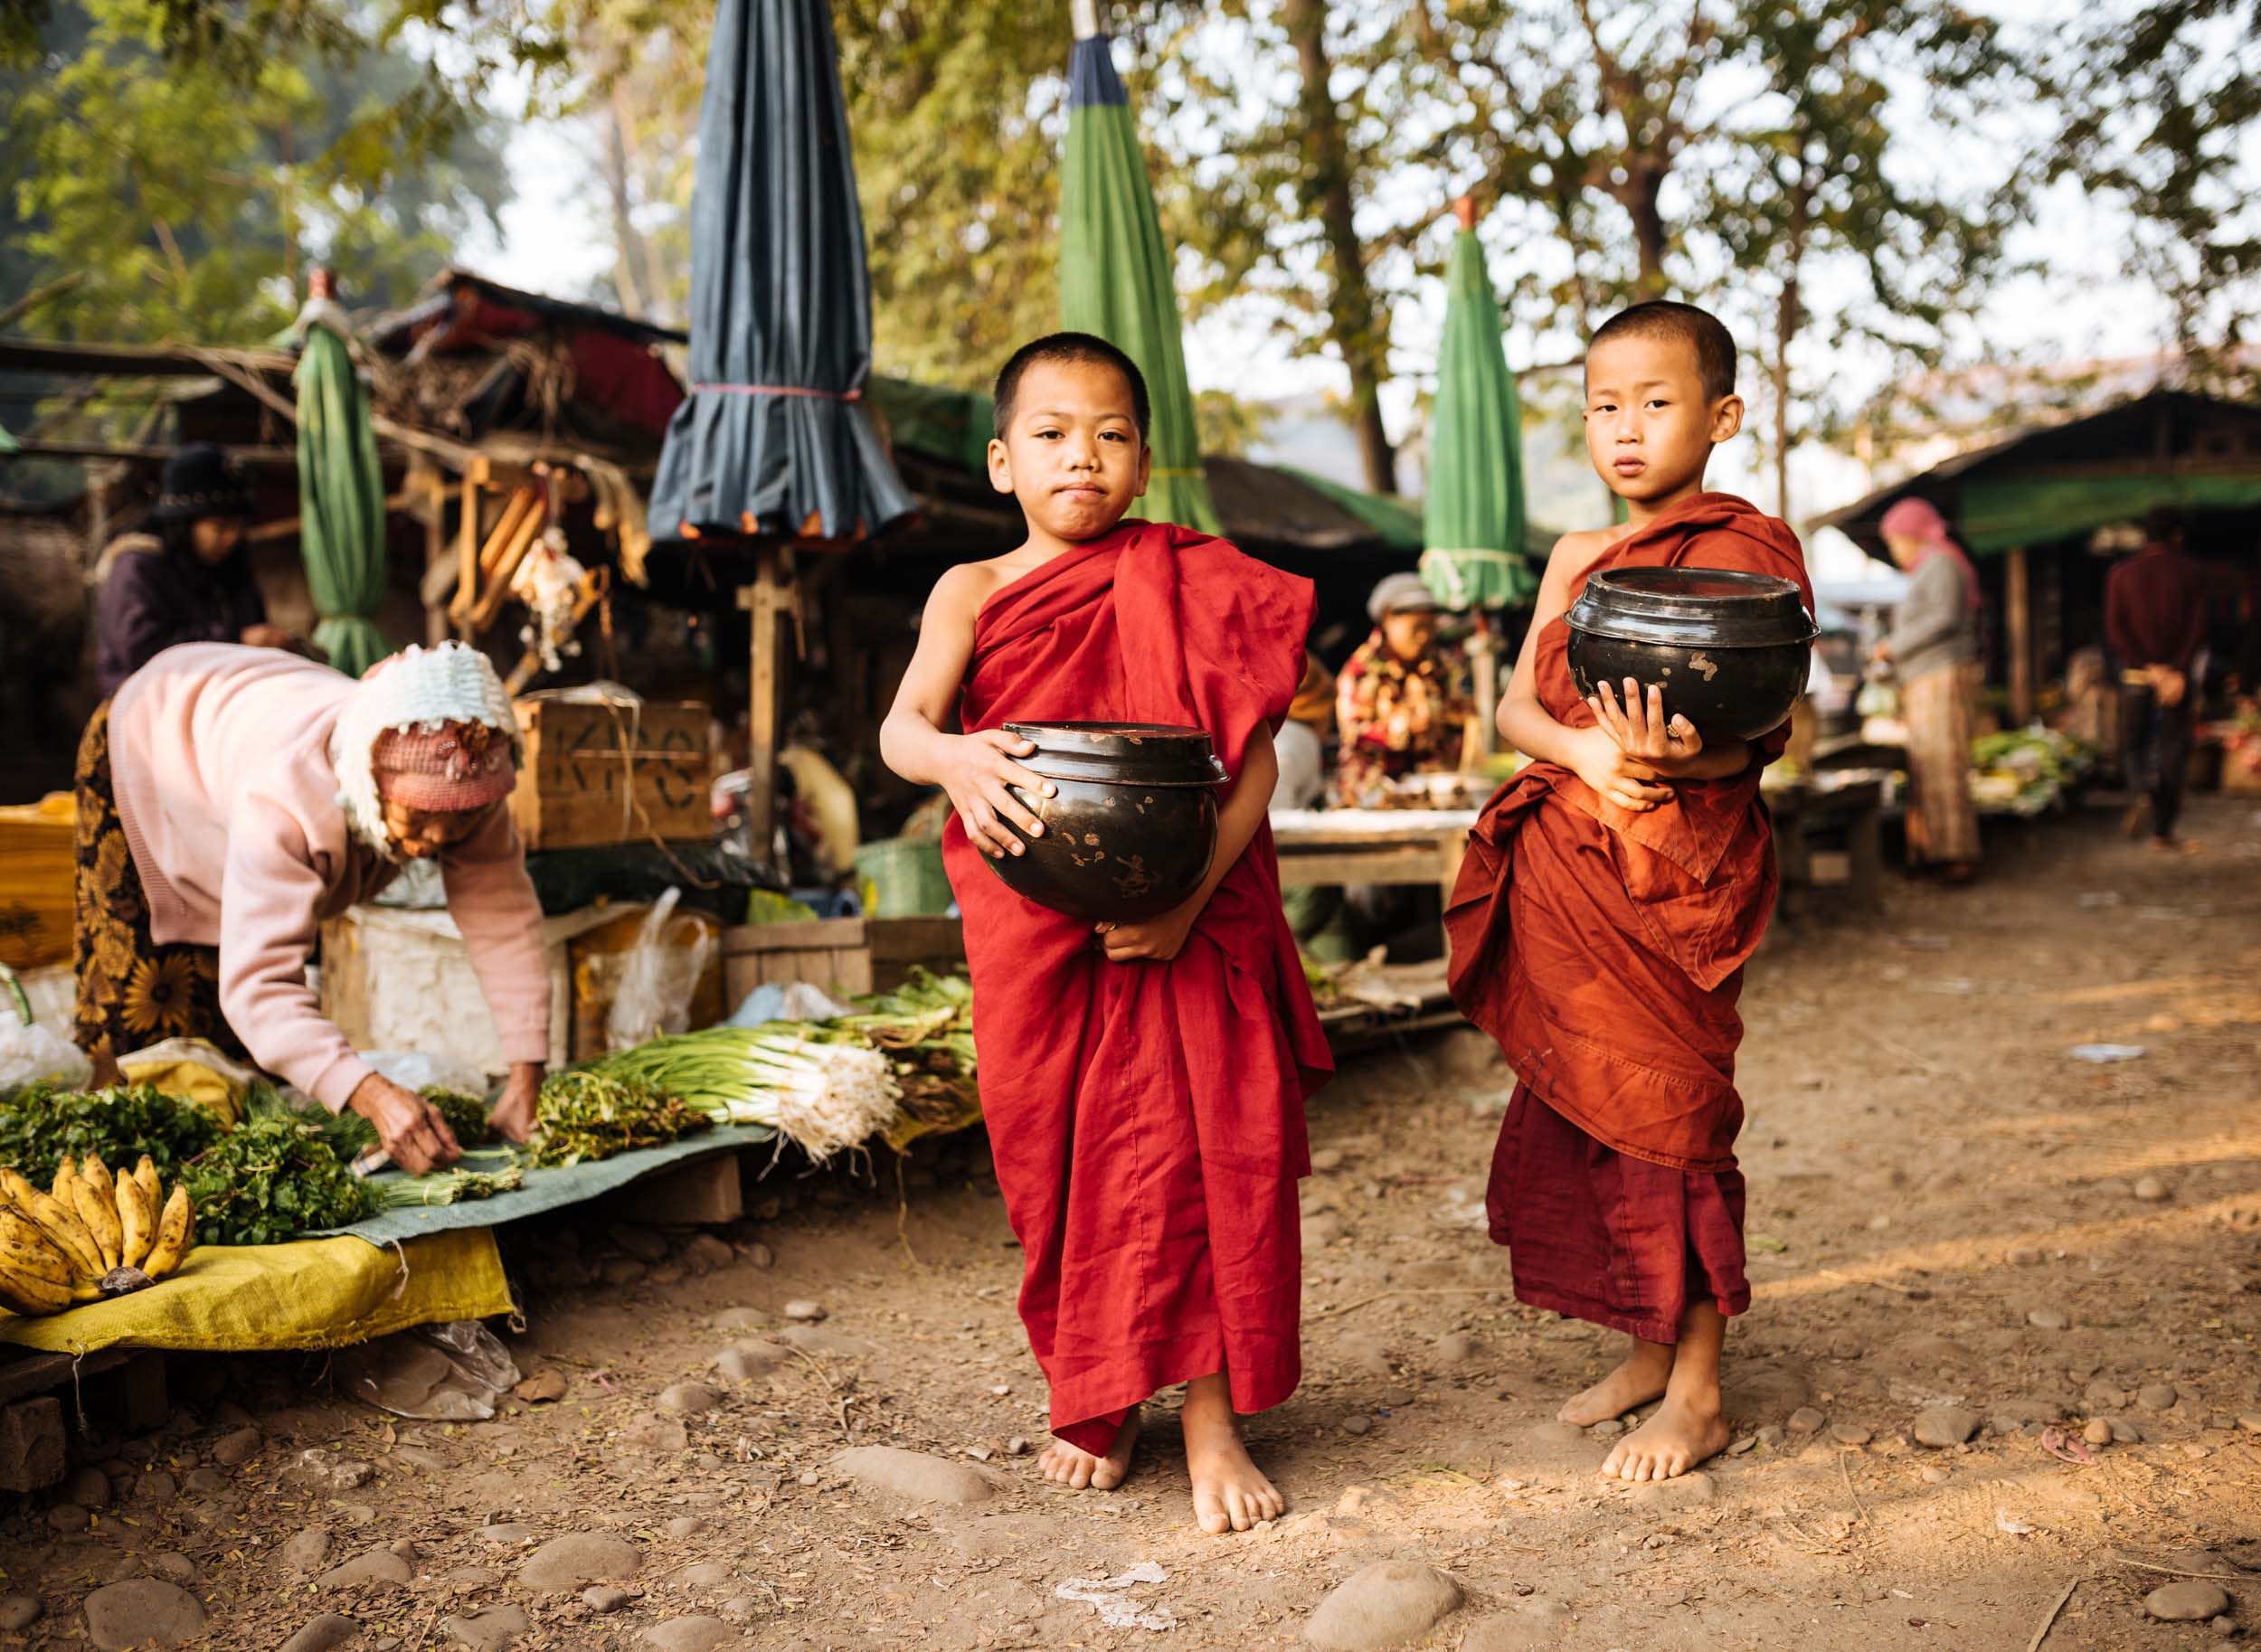 monks-collecting-alms-market-food-hsipaw-myanmar-asian